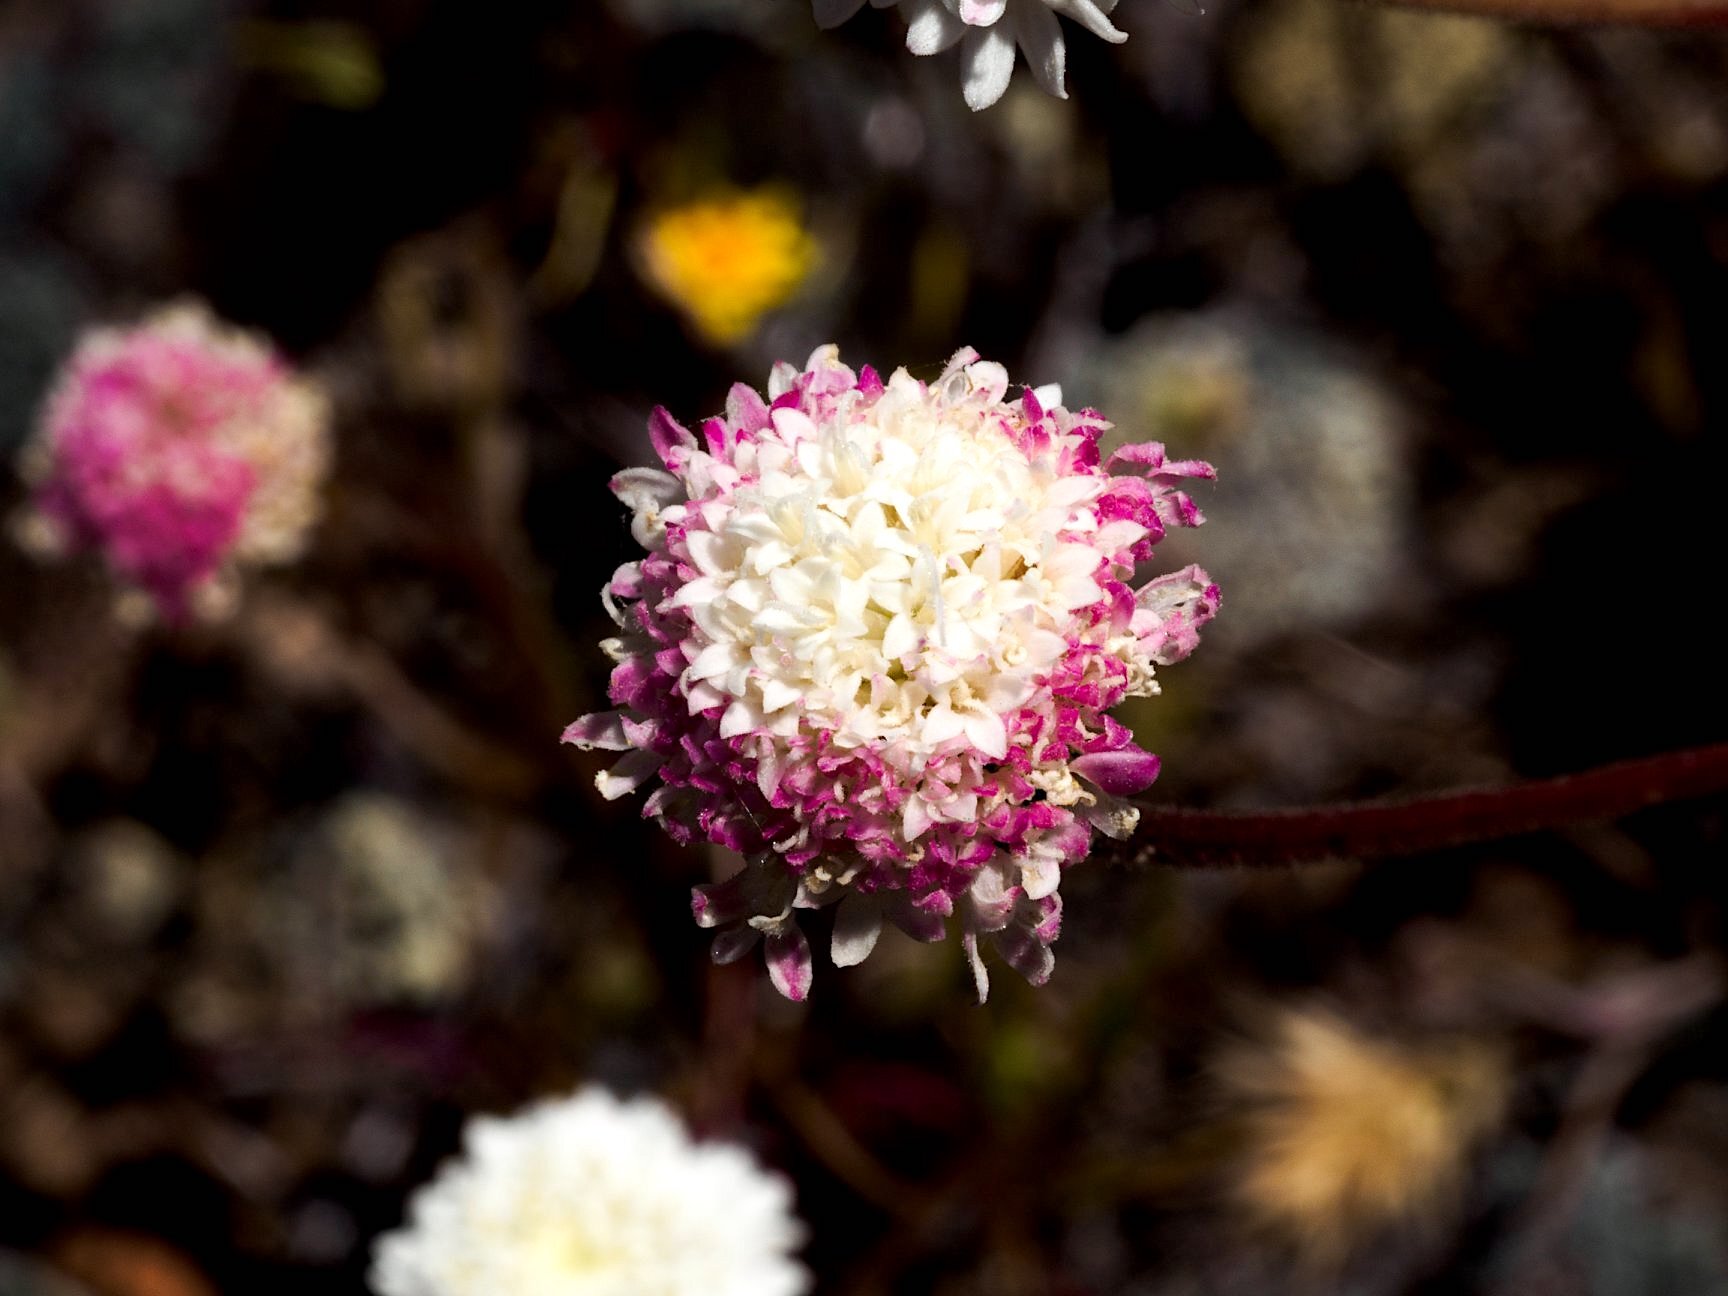 White Pincushion (Chaenactis artemisiifolia) with white and pink flowers